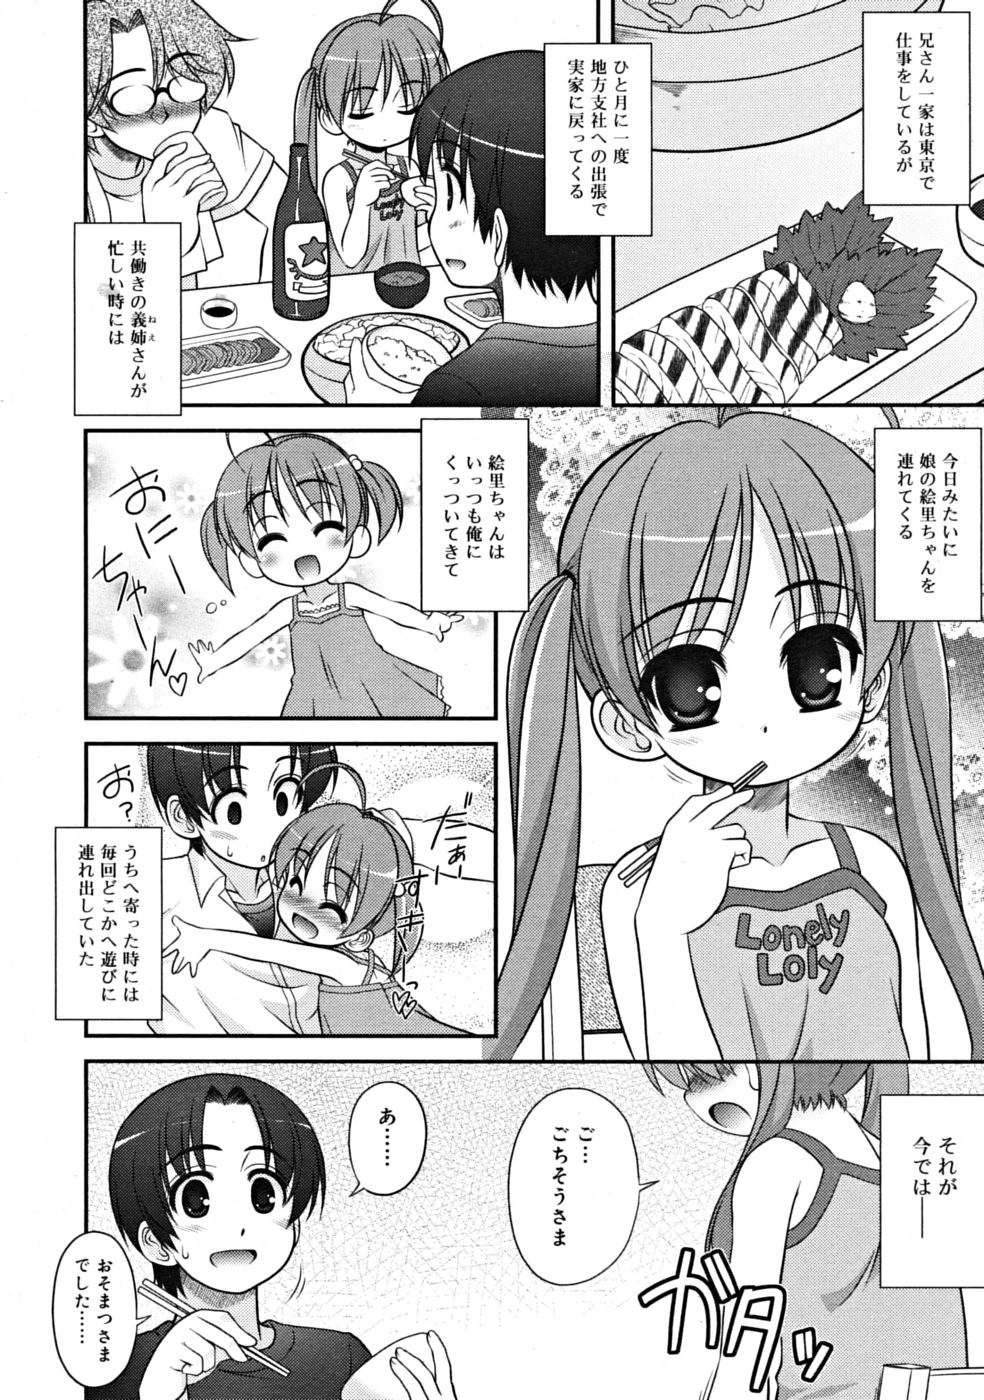 COMIC RiN 2008-09 page 24 full